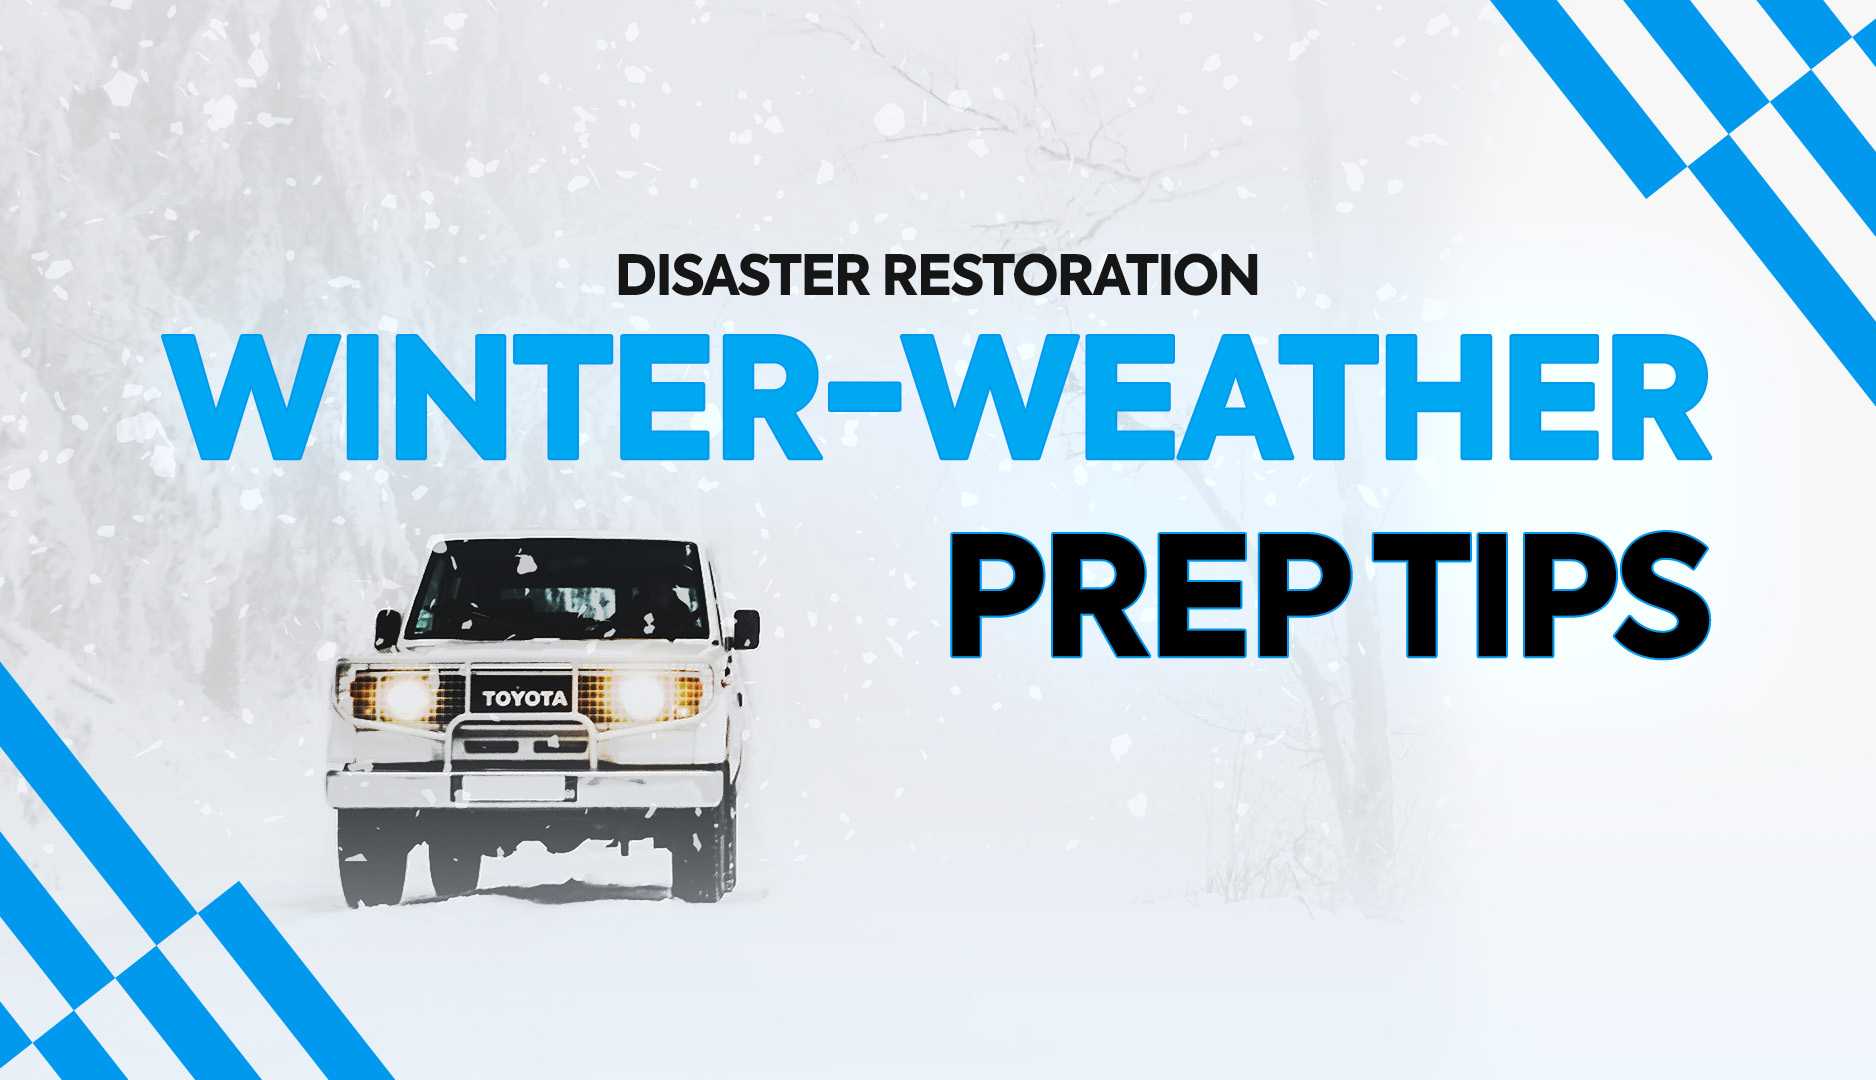 restorer car in the snow prepare Winter-Weather Prep Tips for Your Disaster Restoration Business